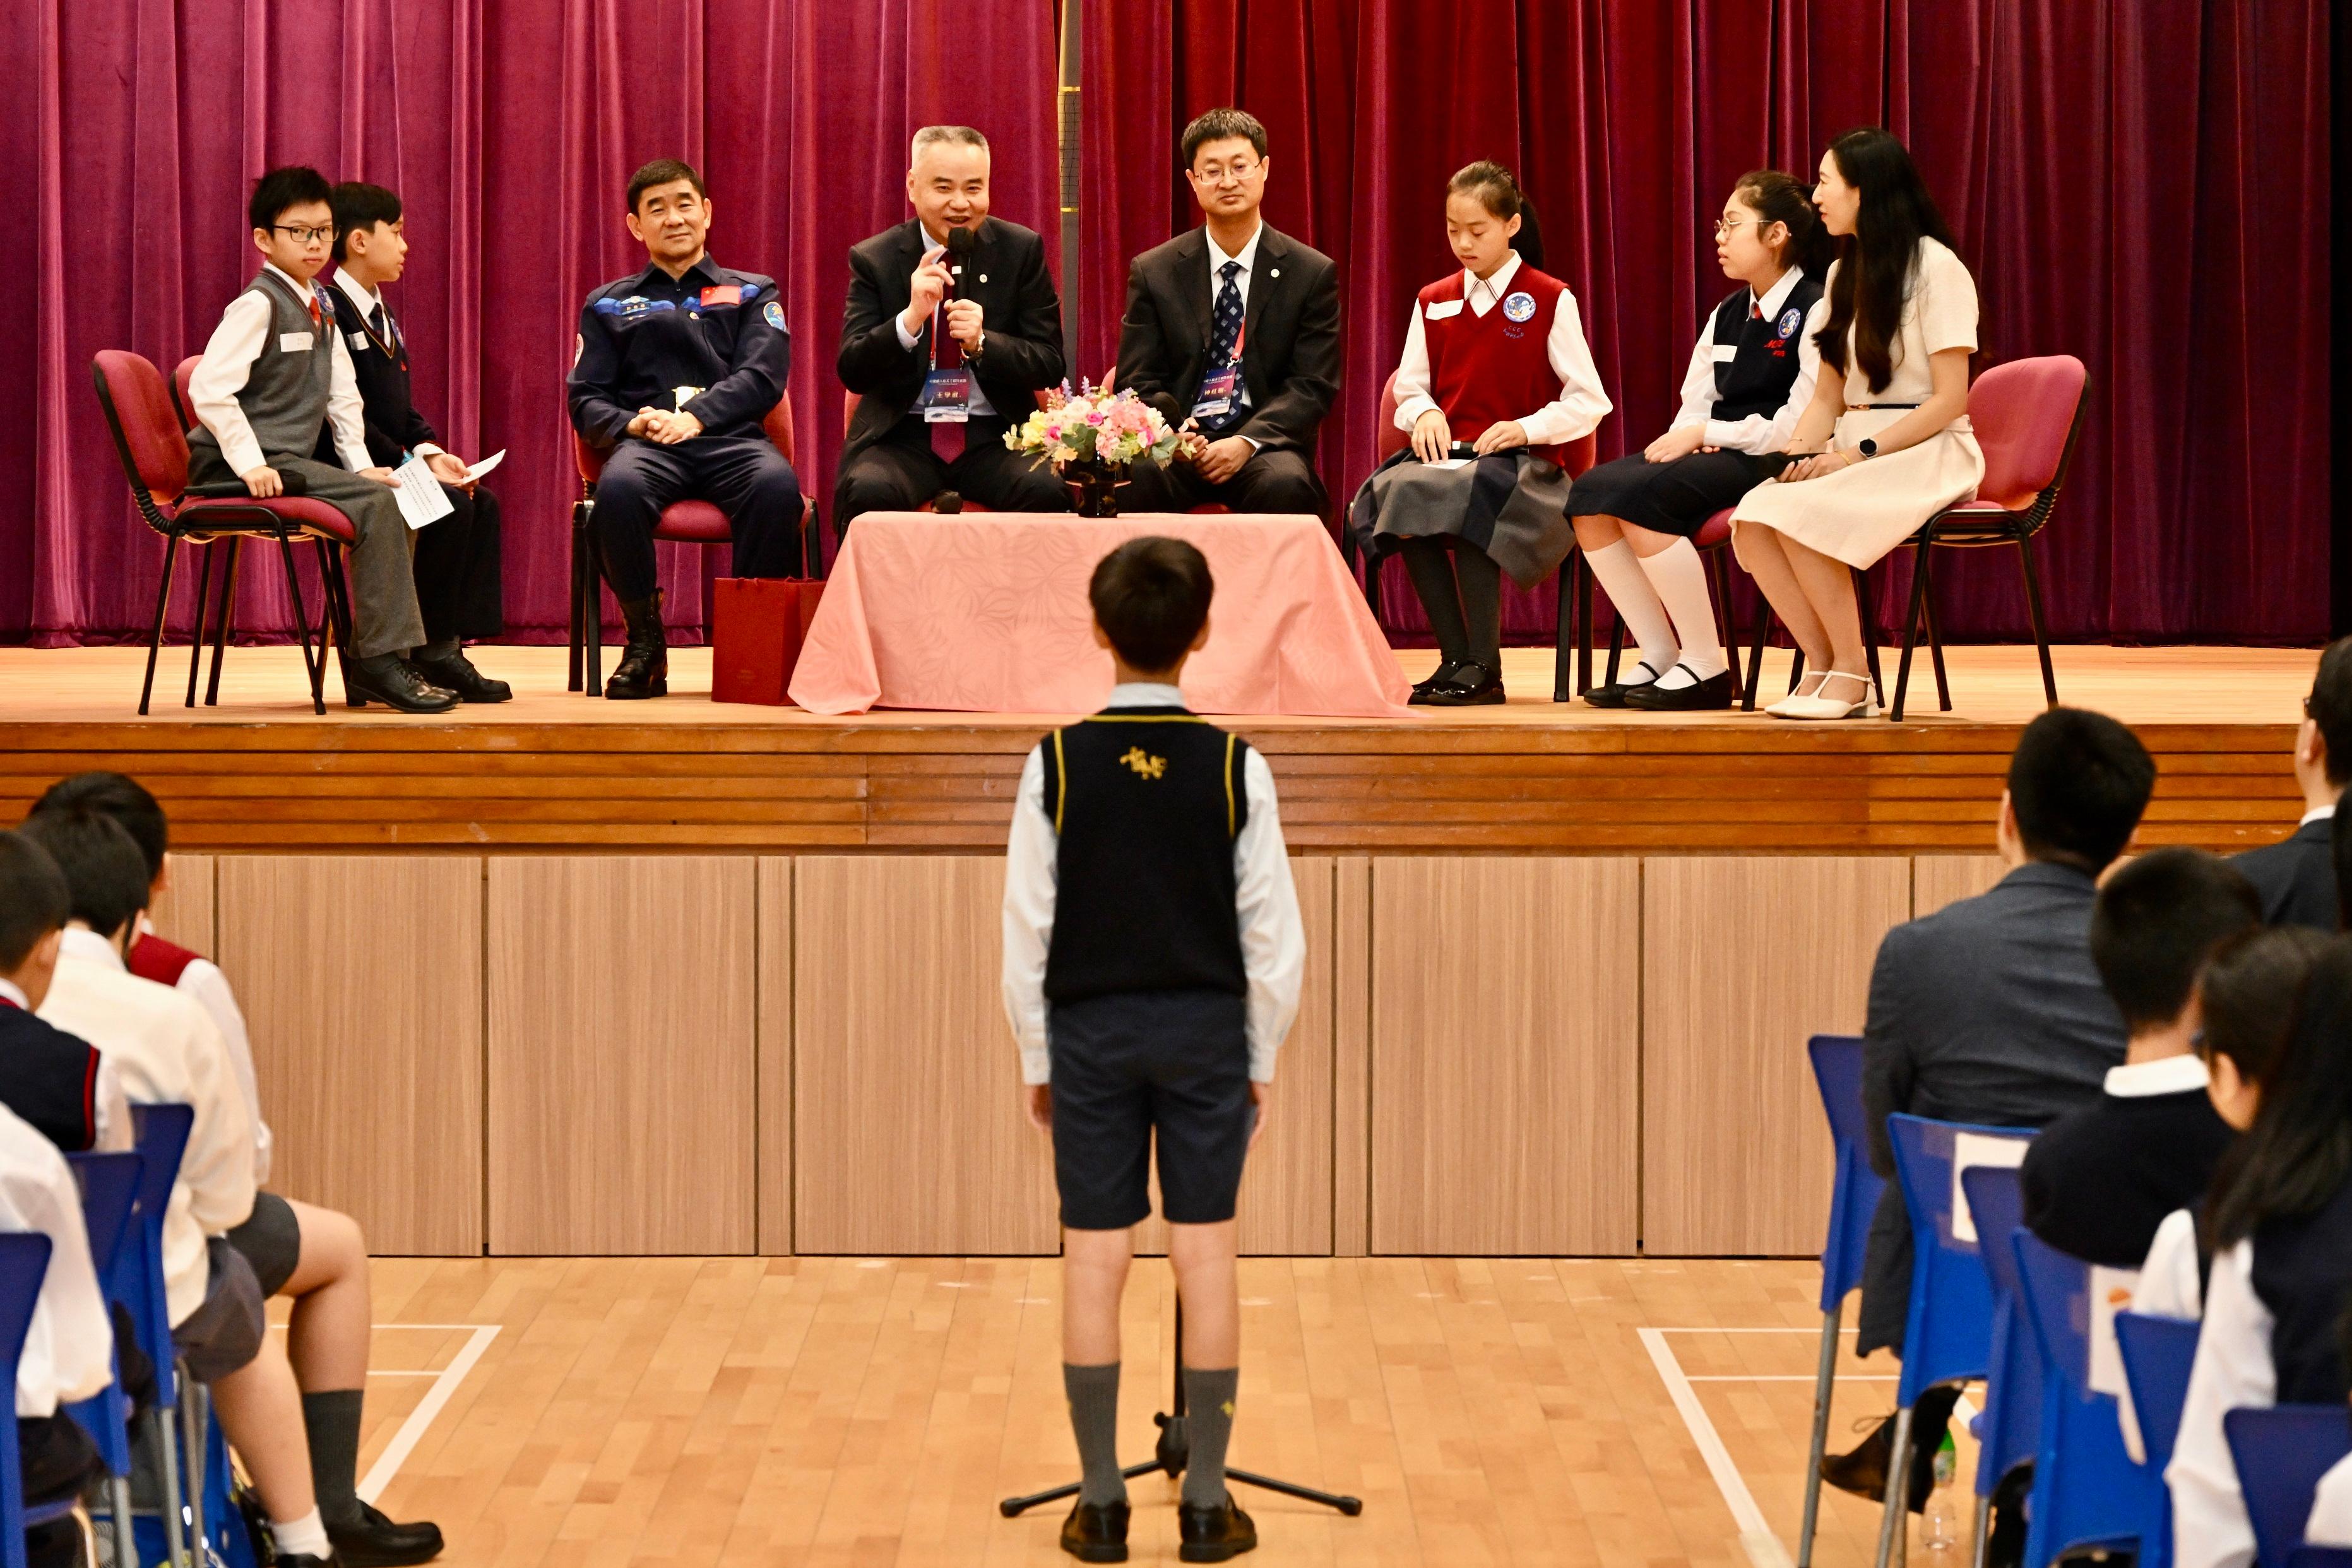 The China Manned Space delegation continued their visit in Hong Kong today (November 29). Photo shows (from third left) Shenzhou-12 astronaut Mr Liu Boming, and delegation members Mr Wang Xuewu and Mr Zhong Hongen, attending a dialogue session with students at Ma Tau Chung Government Primary School (Hung Hom Bay).